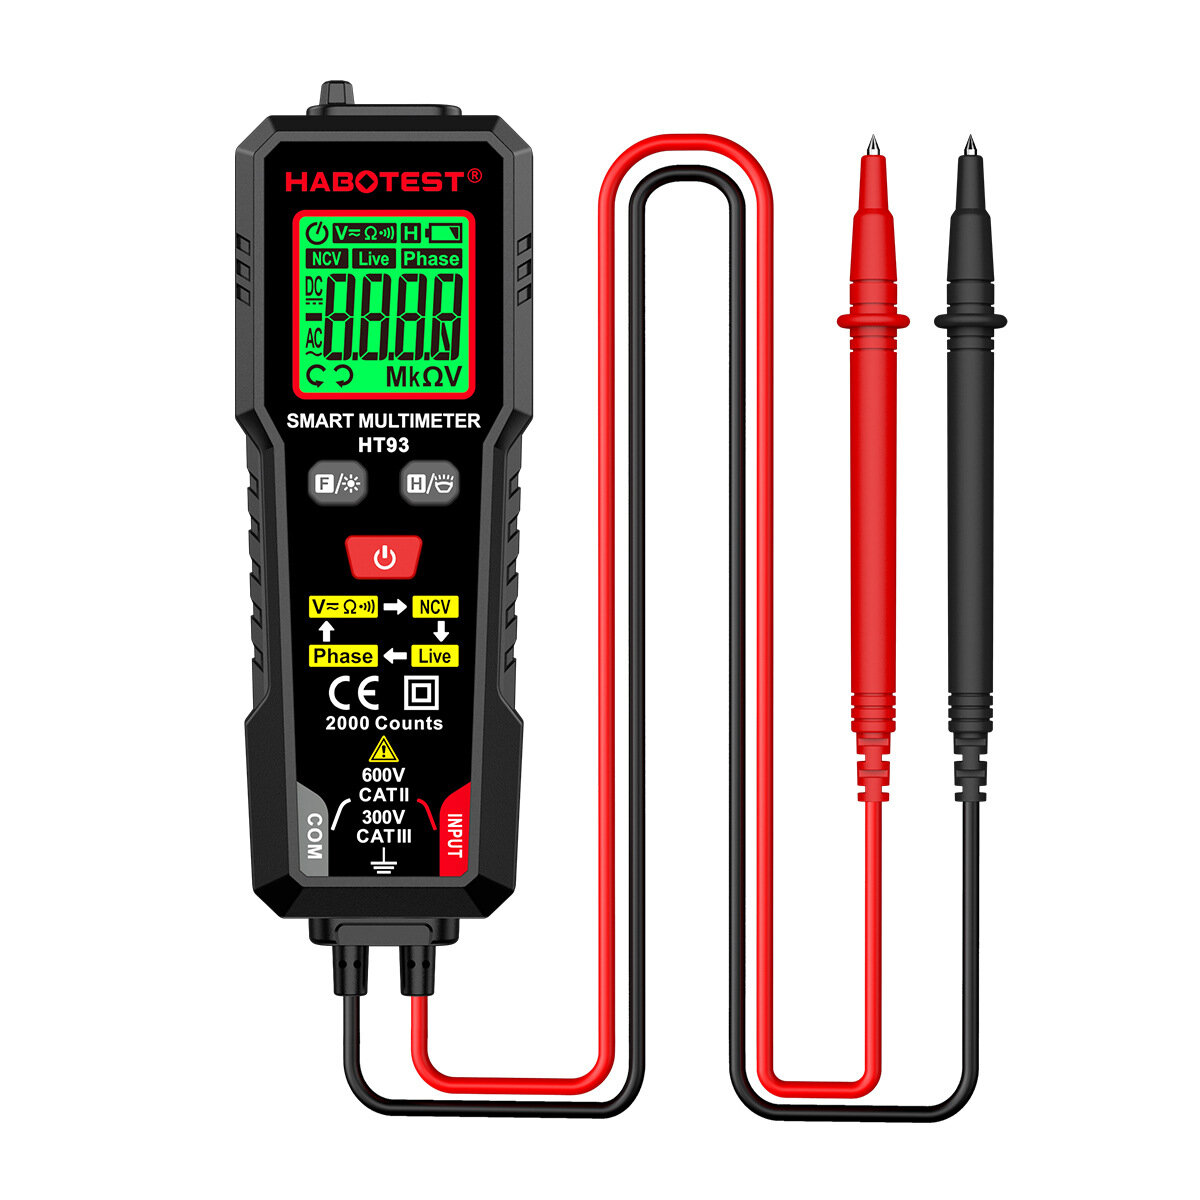 best price,habotest,ht93,digital,multimeter,coupon,price,discount